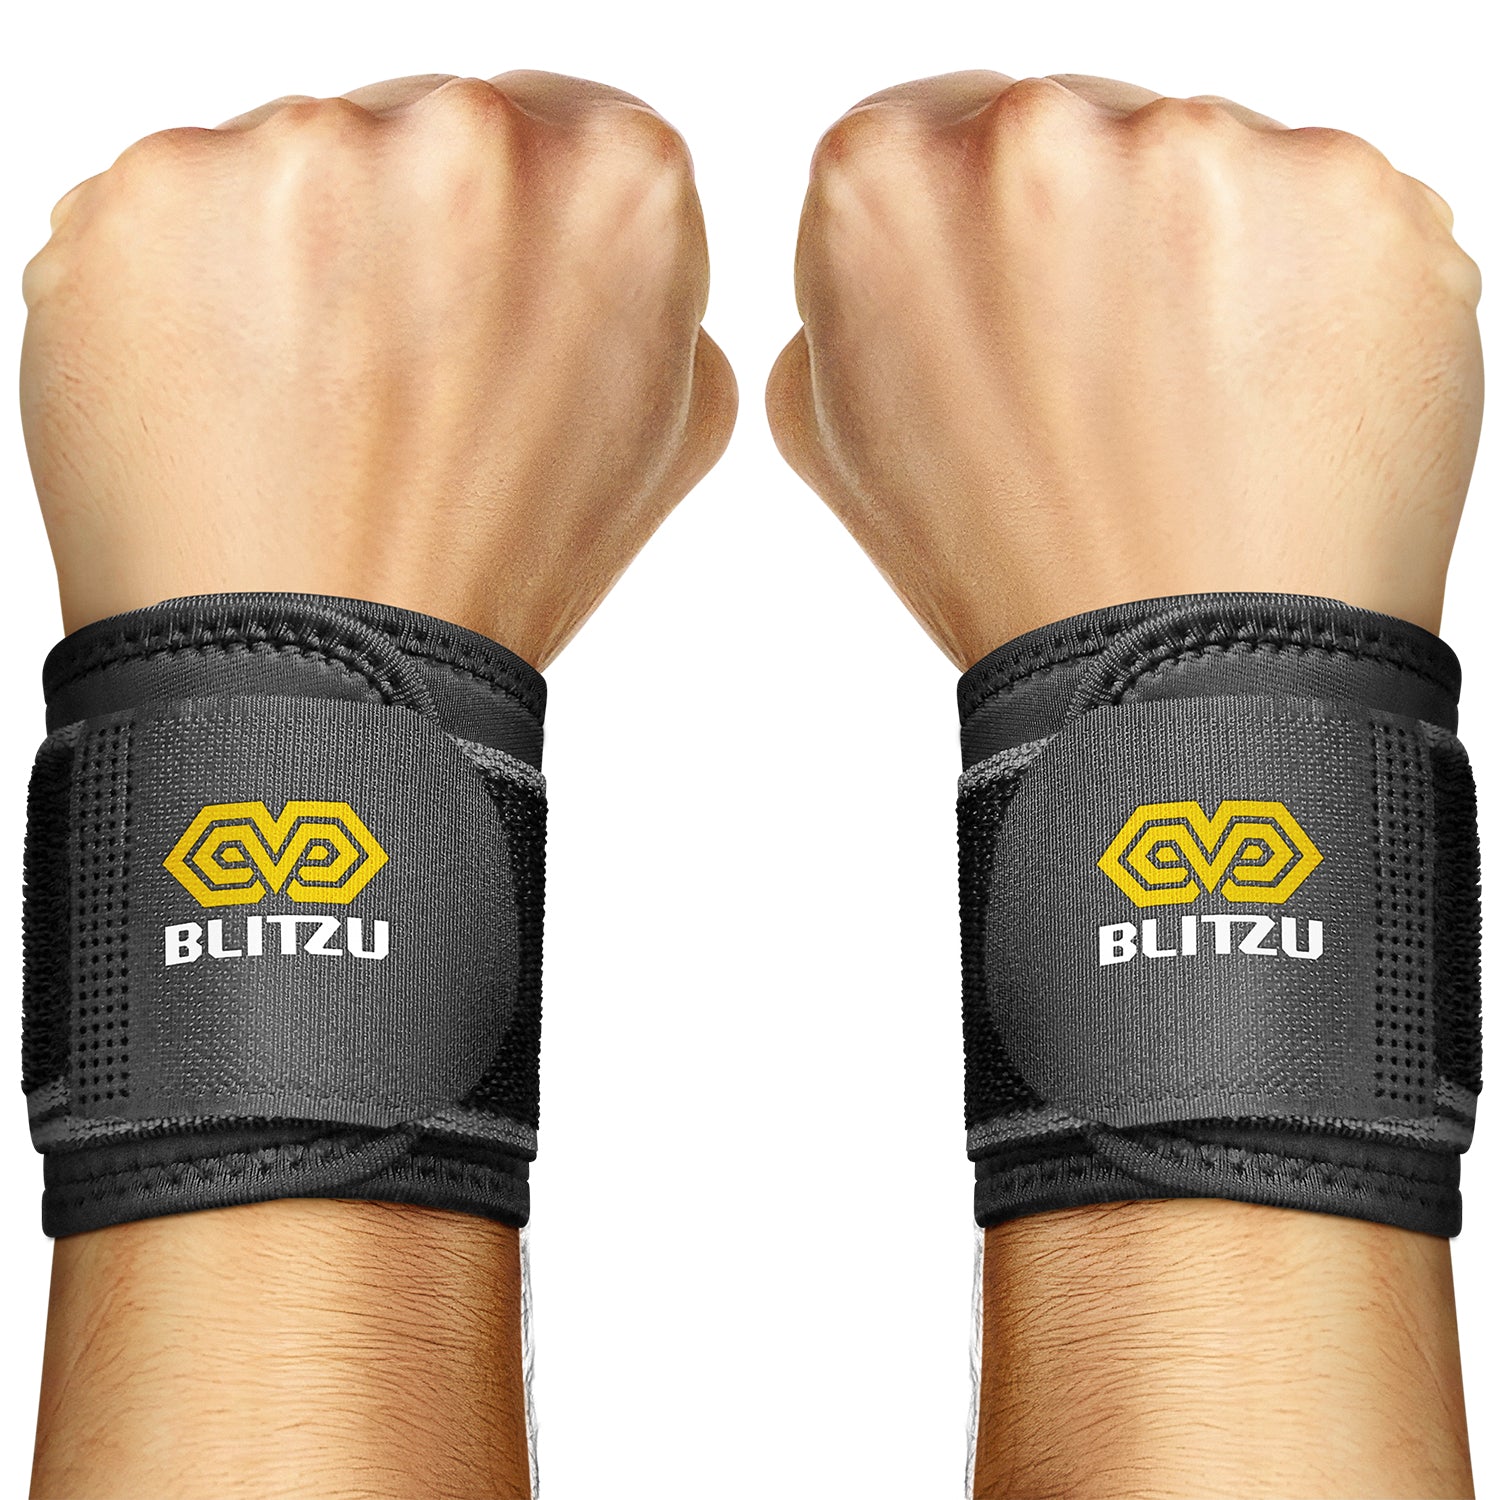 2 Pack Wrist Strap Brace For Work Out